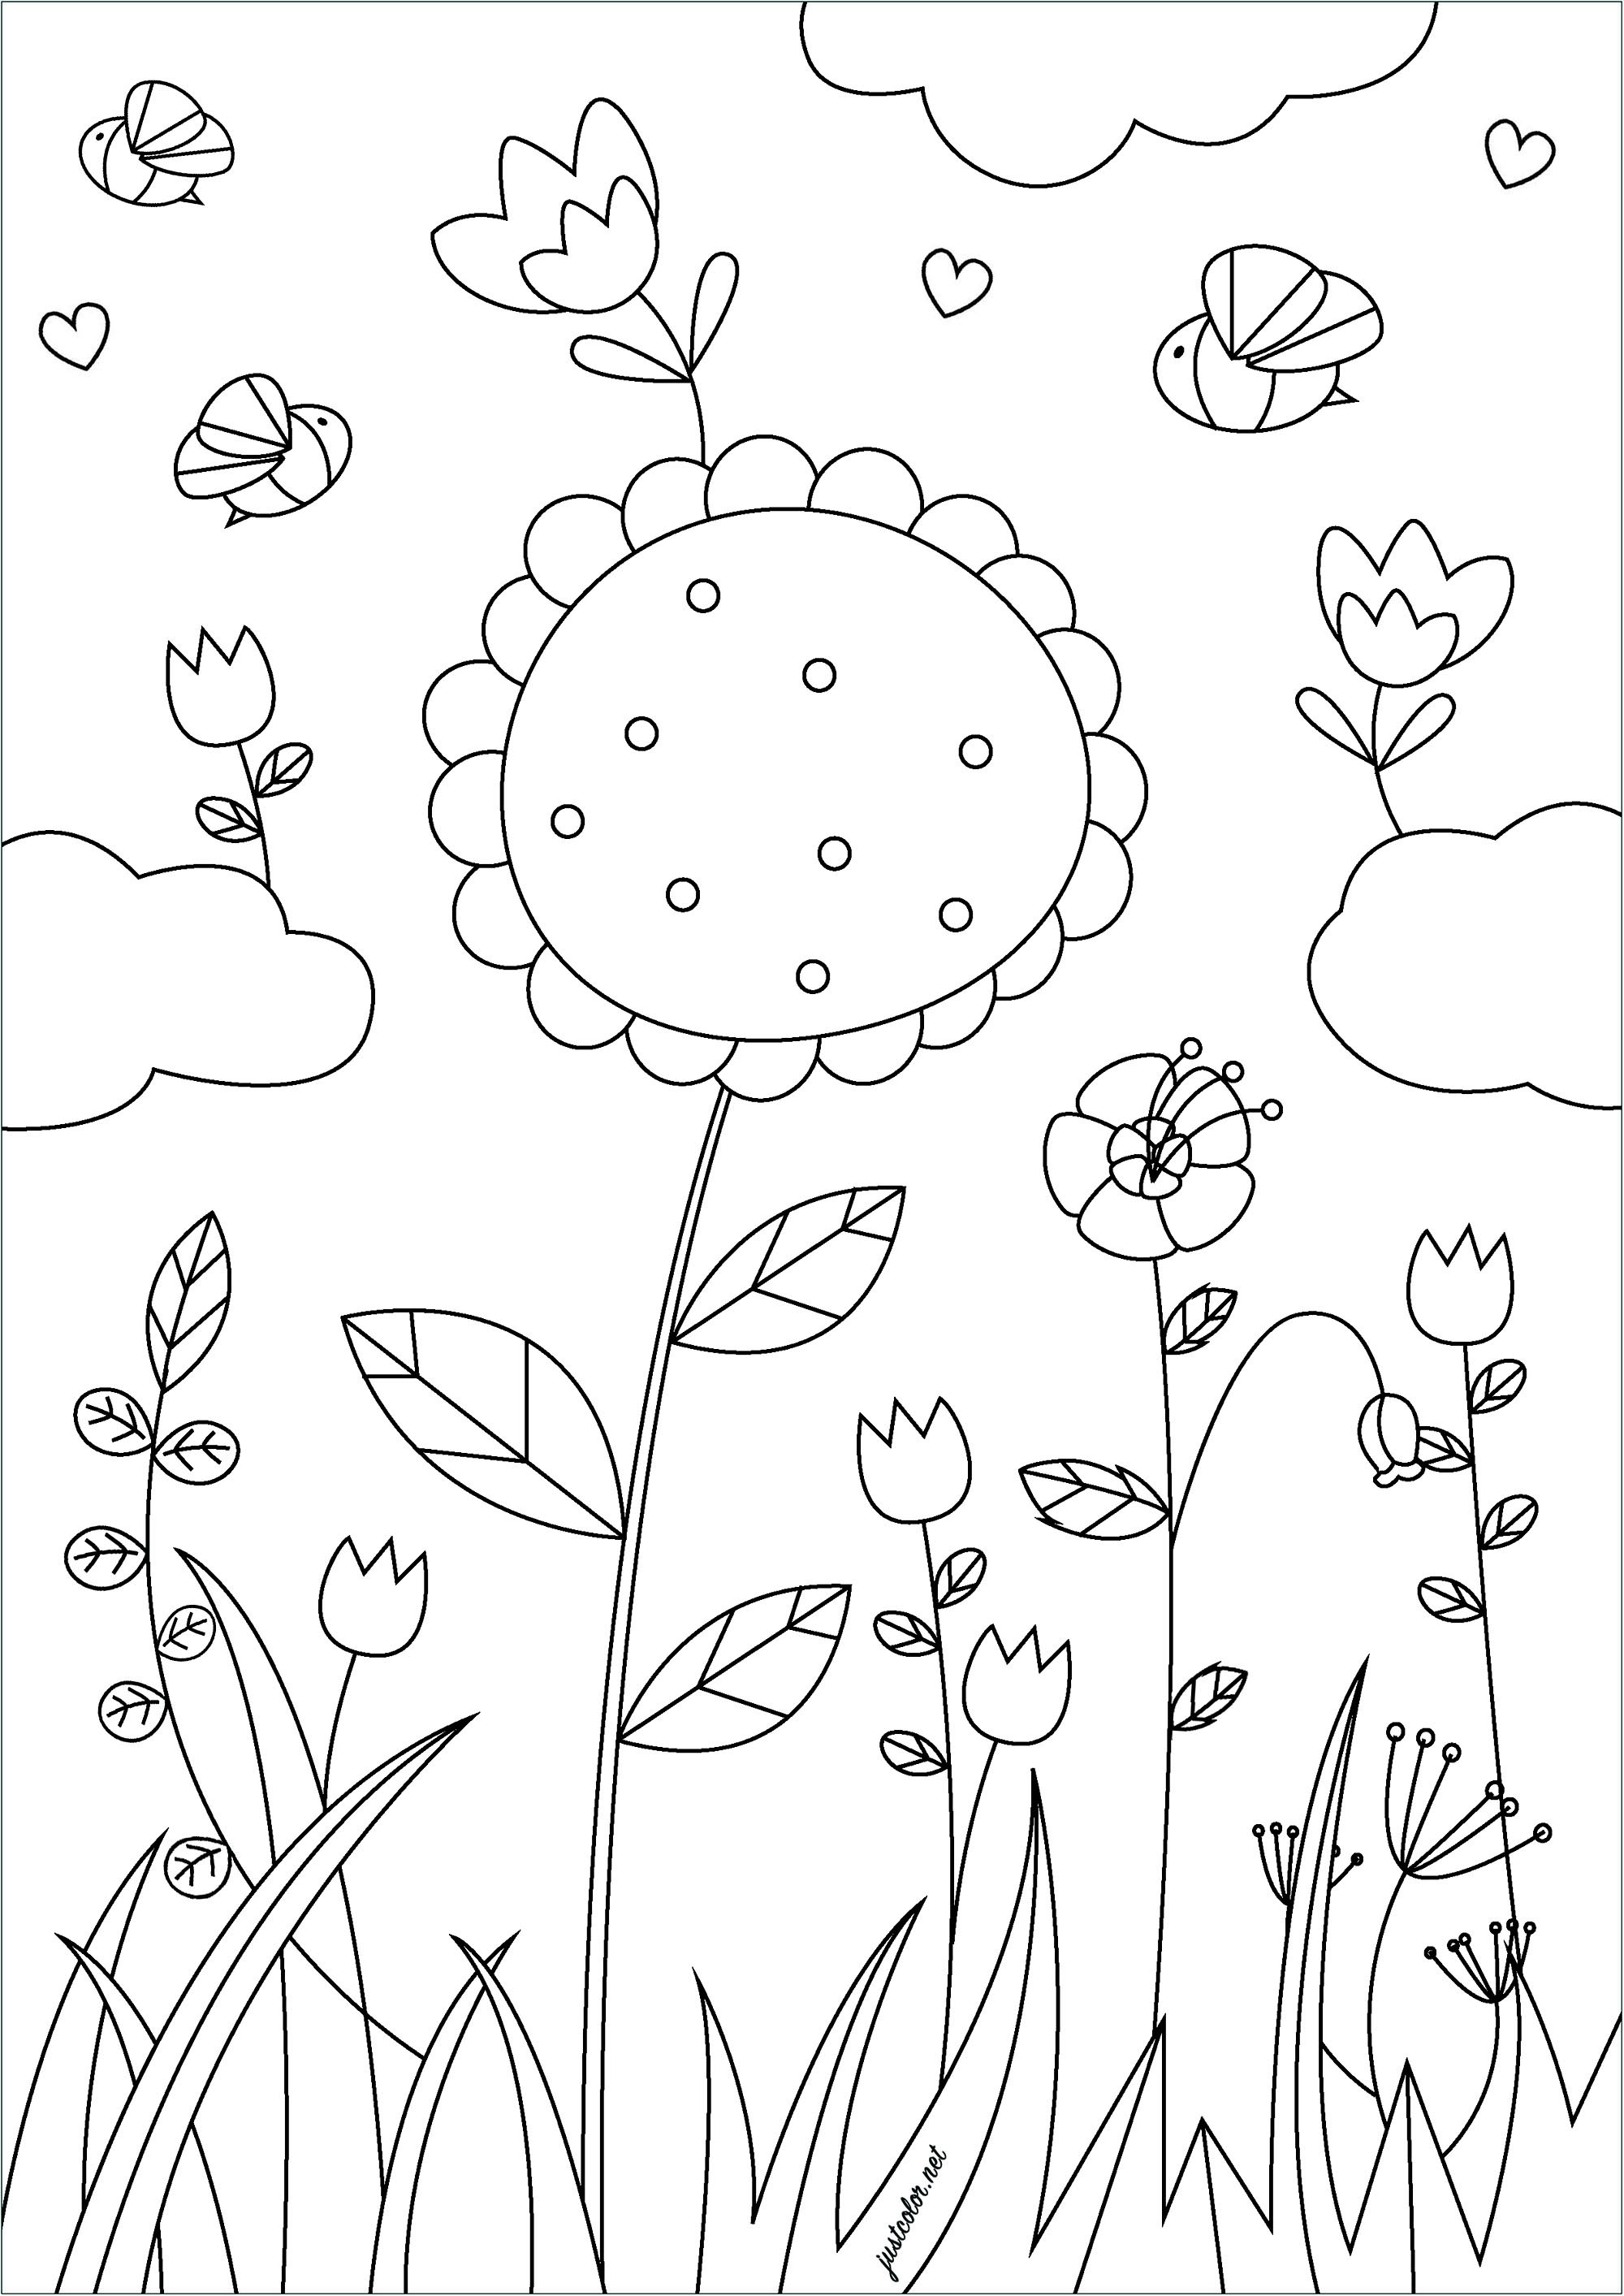 Pretty flowers in the wind. This coloring called 'Spring Flowers' consists of several flowers blooming in a field of greenery.